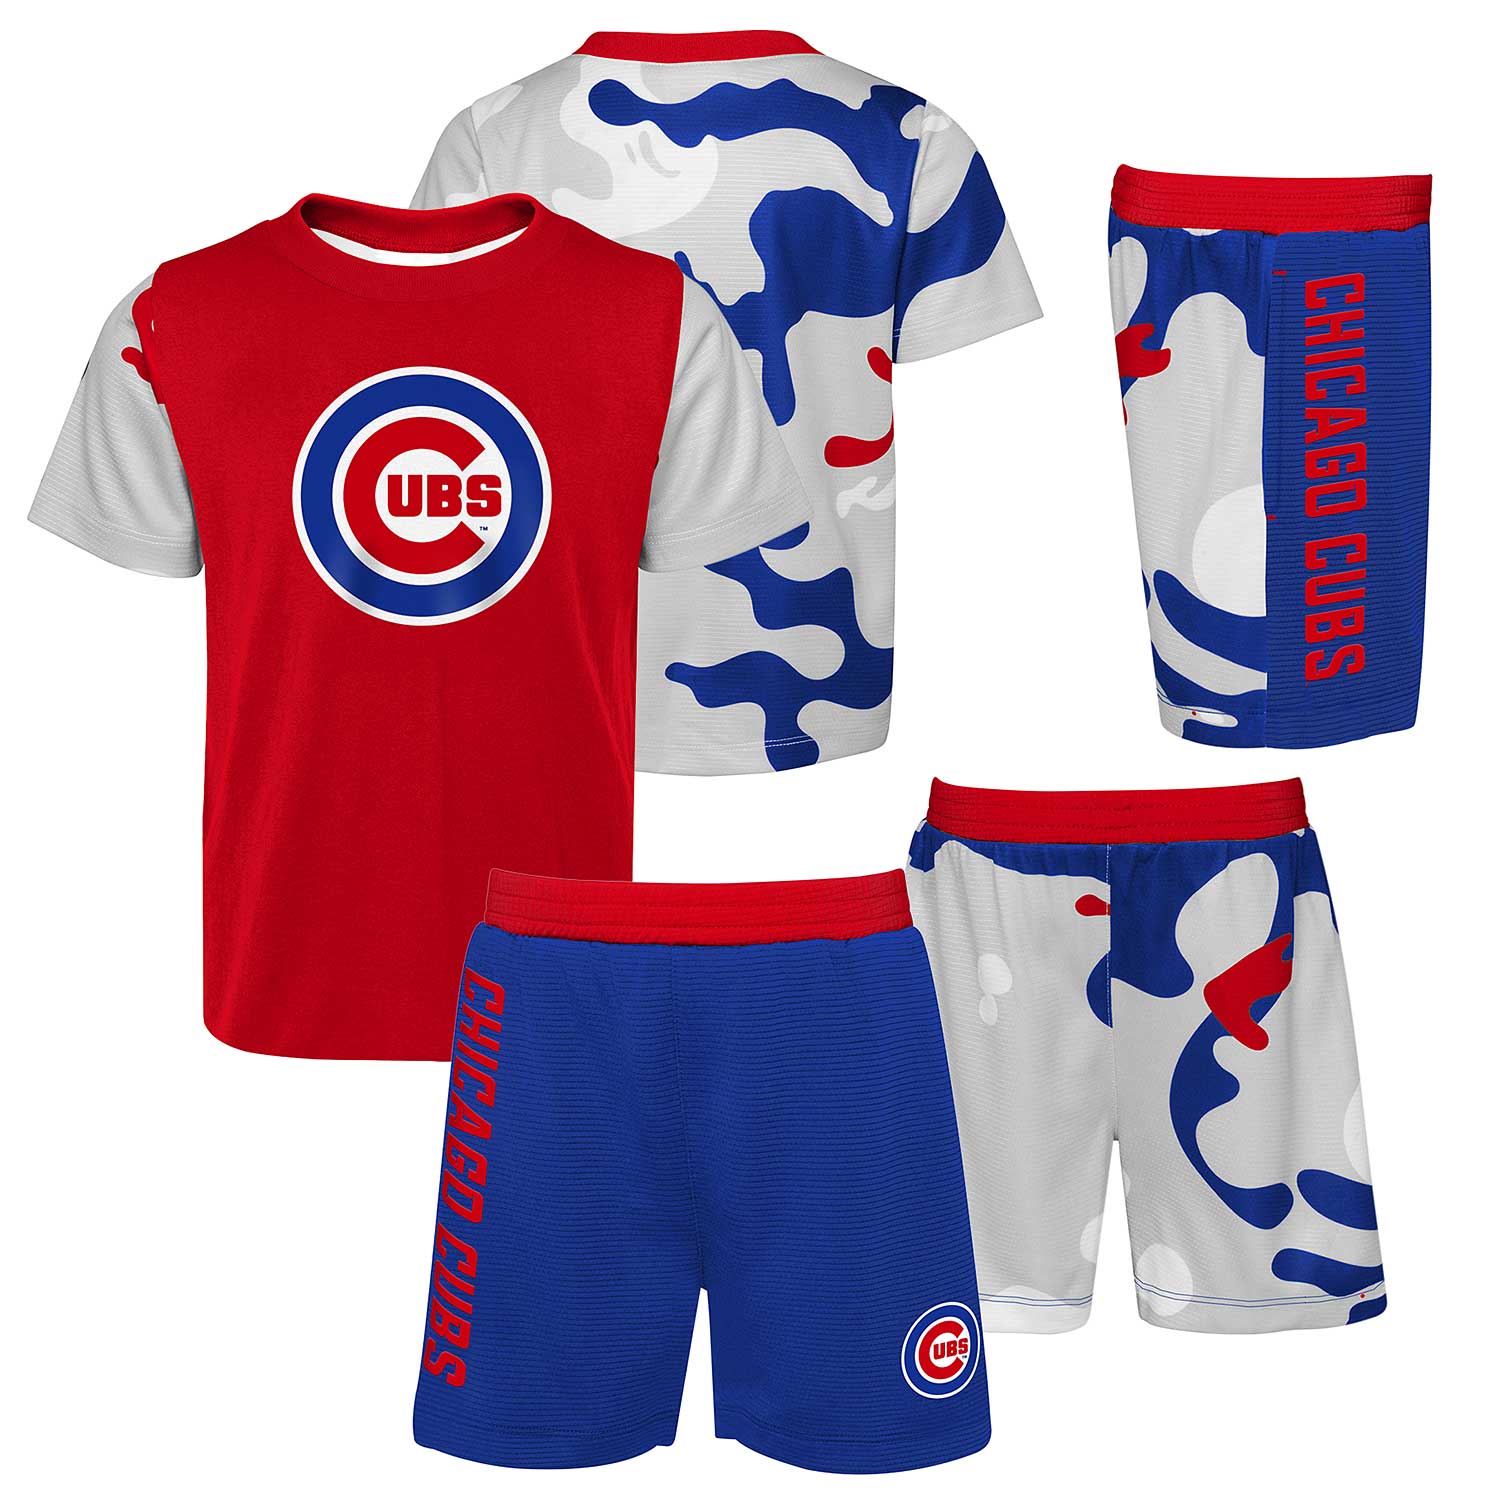 New 2T Chicago Cubs Baseball Shirt Shorts Toddler Outfit Red Blue